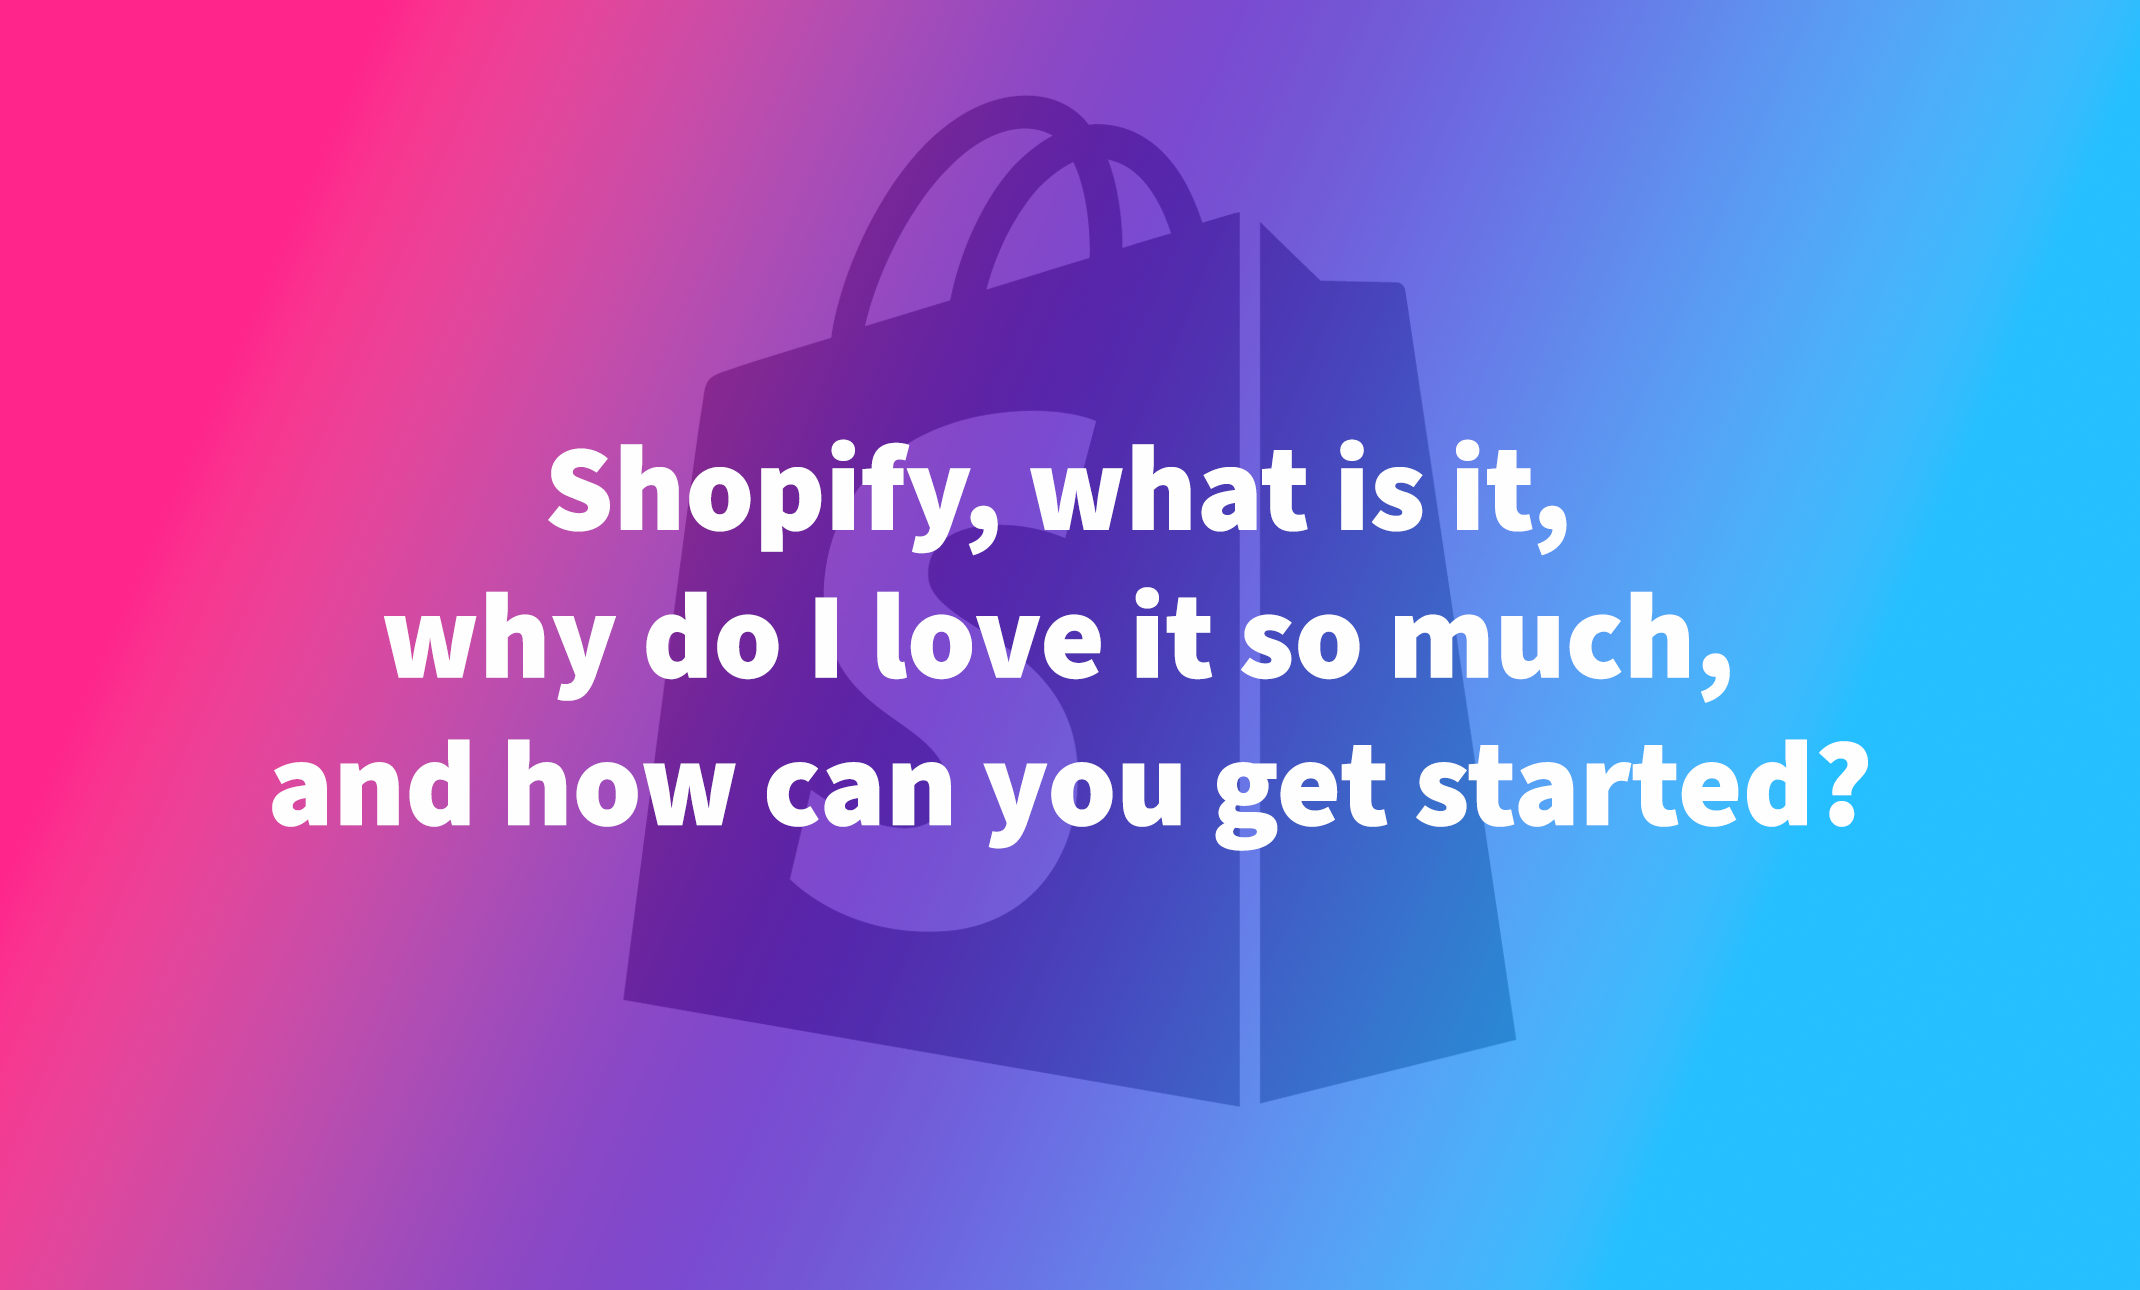 Shopify, what is it, why do I love it so much, and how can you get started?